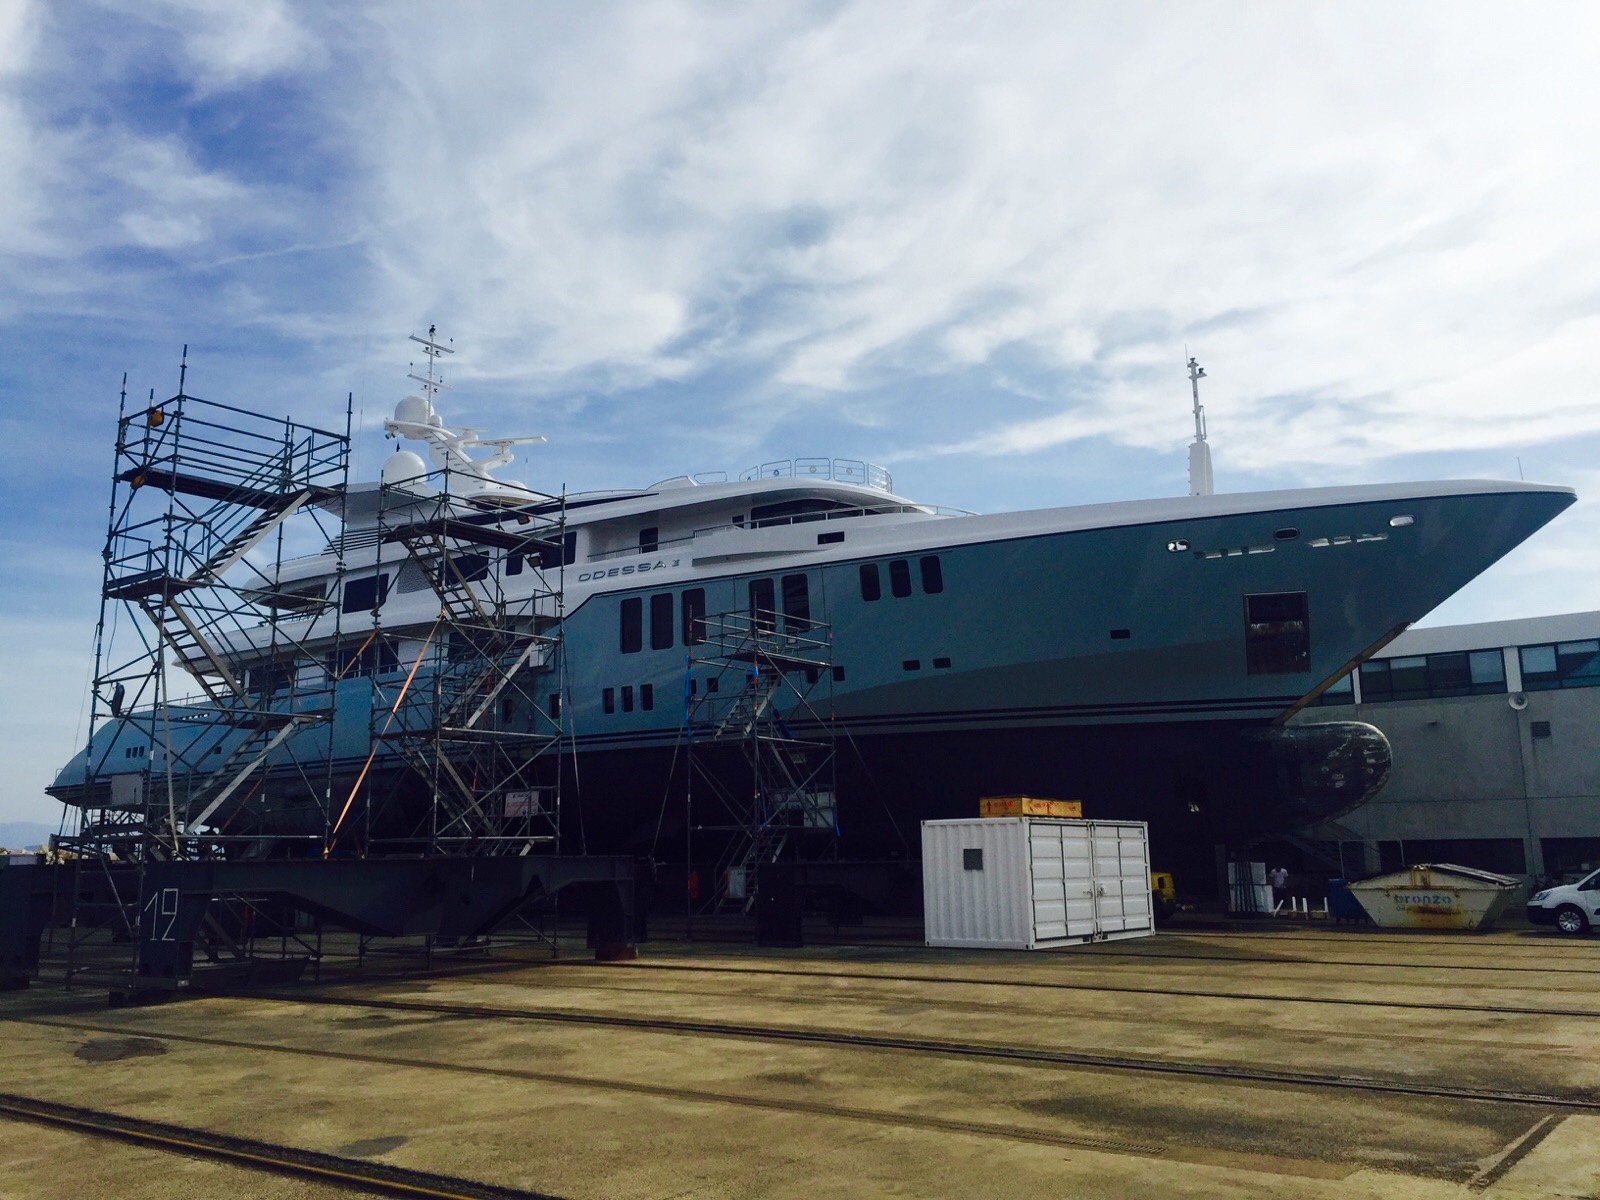 Luxury motor yacht ODESSA II being coated by Zytexx - Image credit to Zytexx